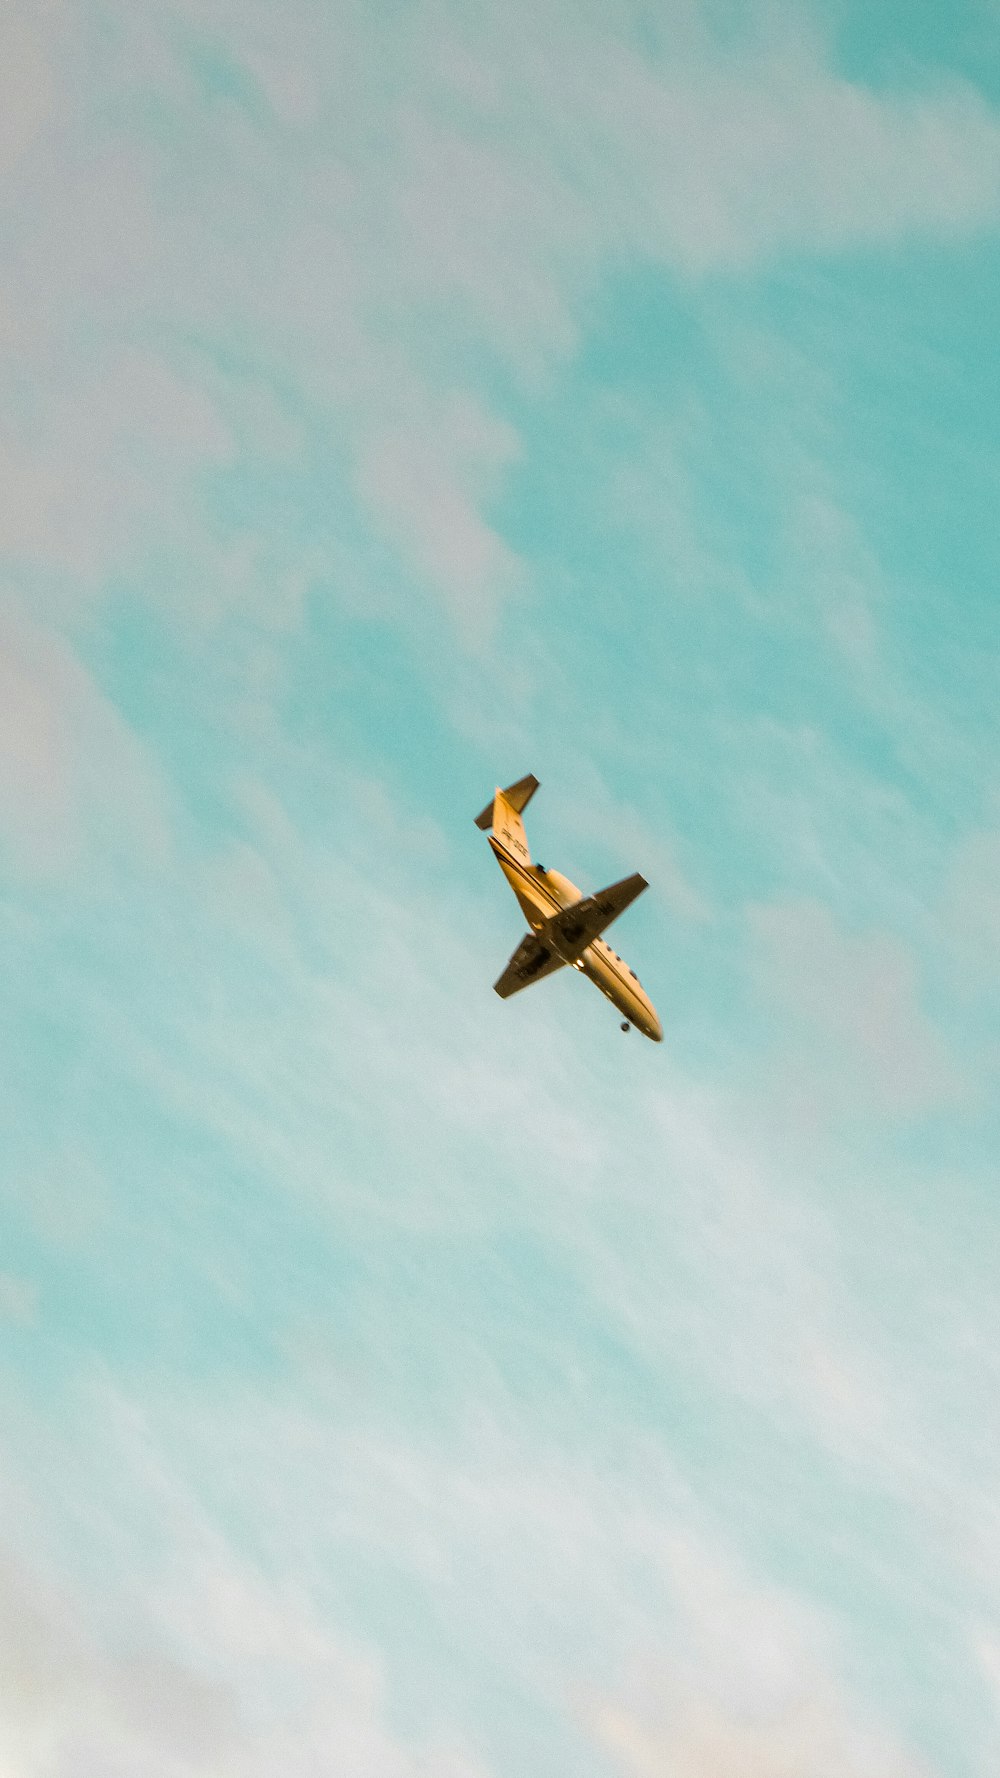 brown and black plane in mid air during daytime